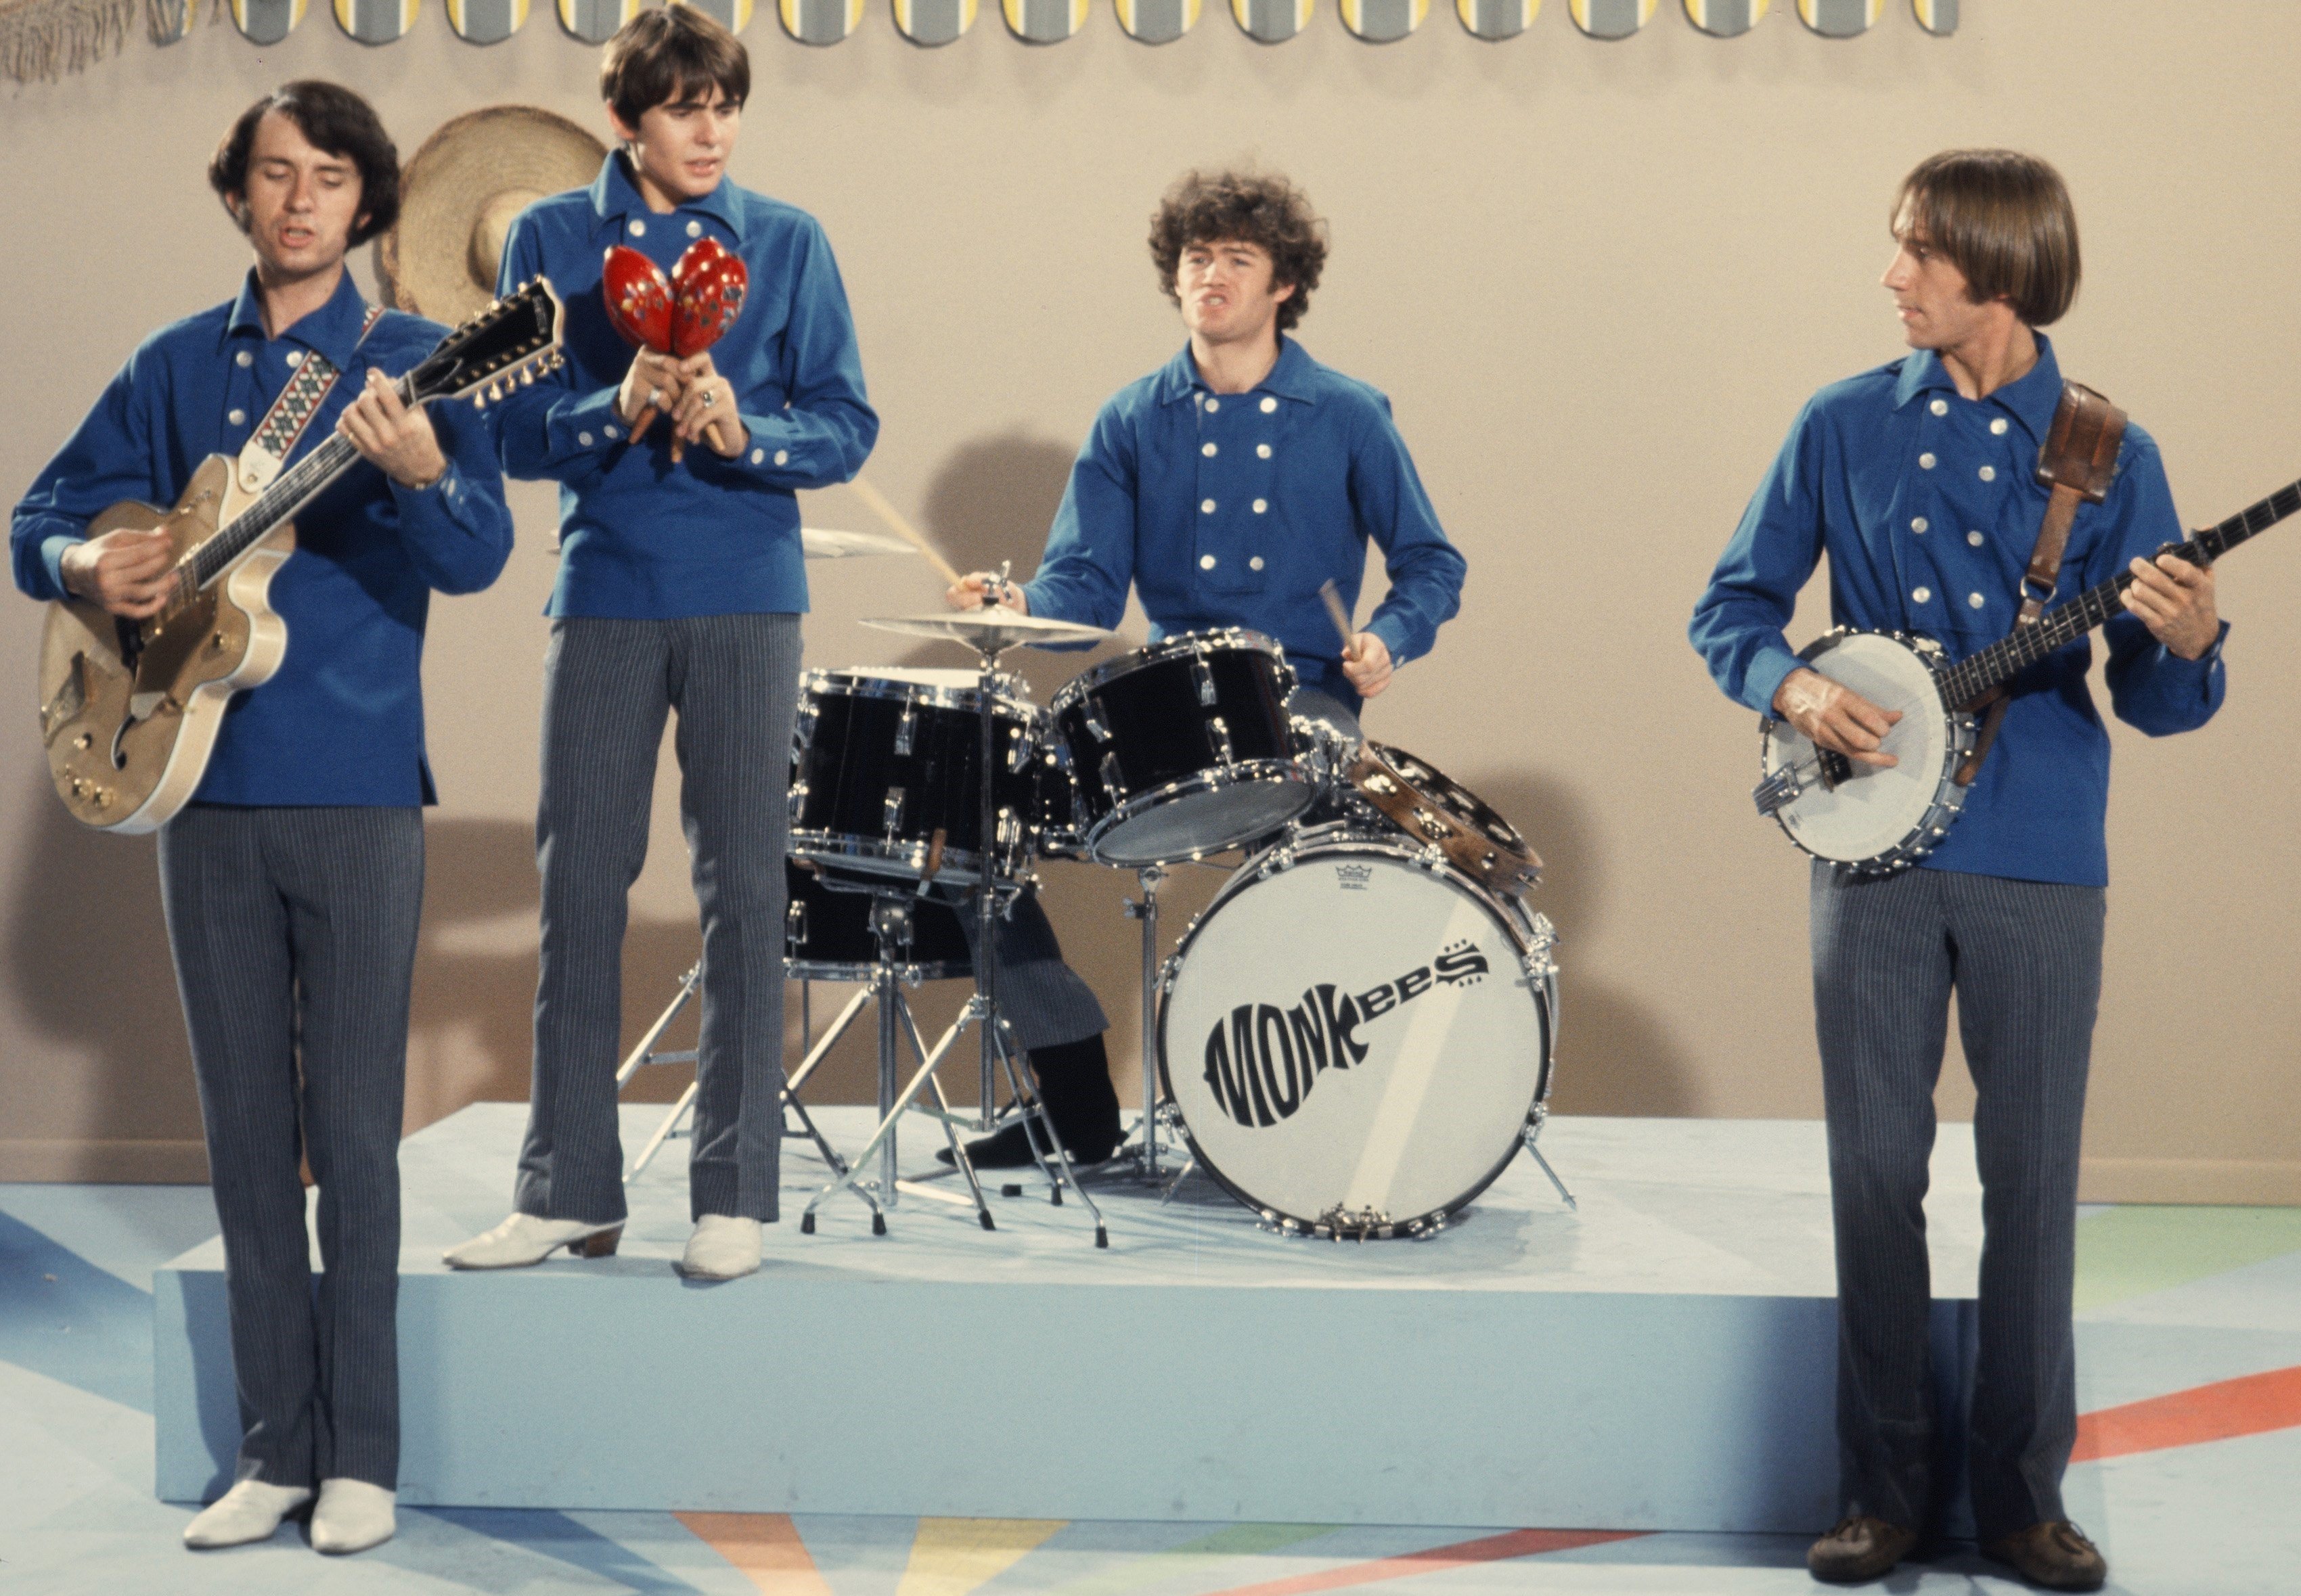 The Monkees’ Mike Nesmith, Davy Jones, Micky Dolenz, and Peter Tork playing instruments